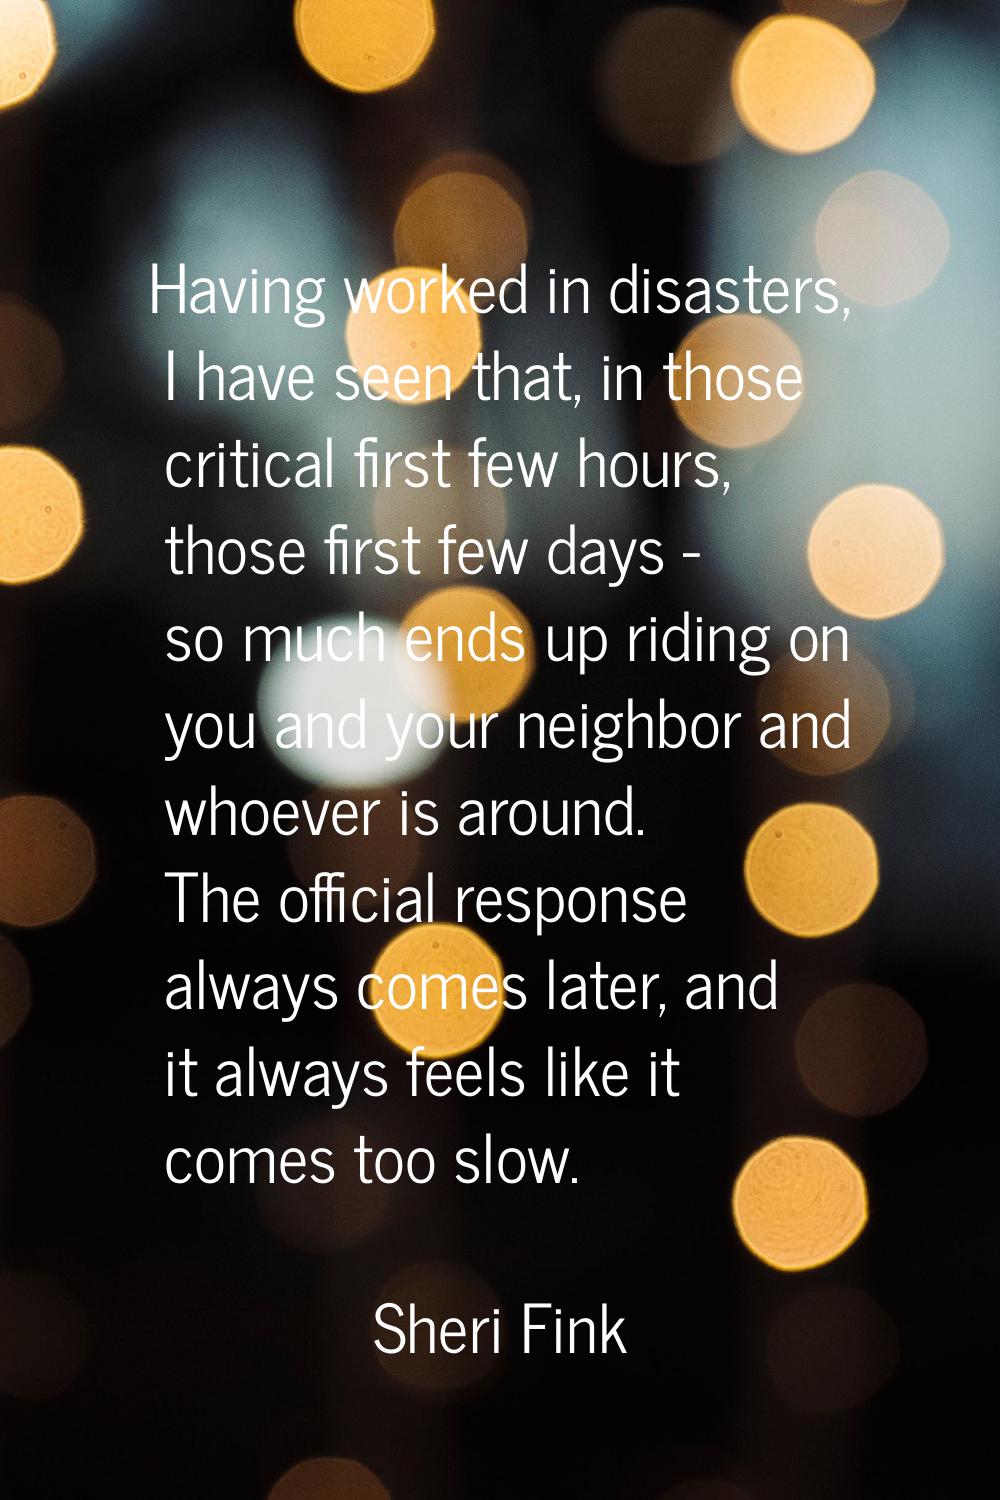 Having worked in disasters, I have seen that, in those critical first few hours, those first few da